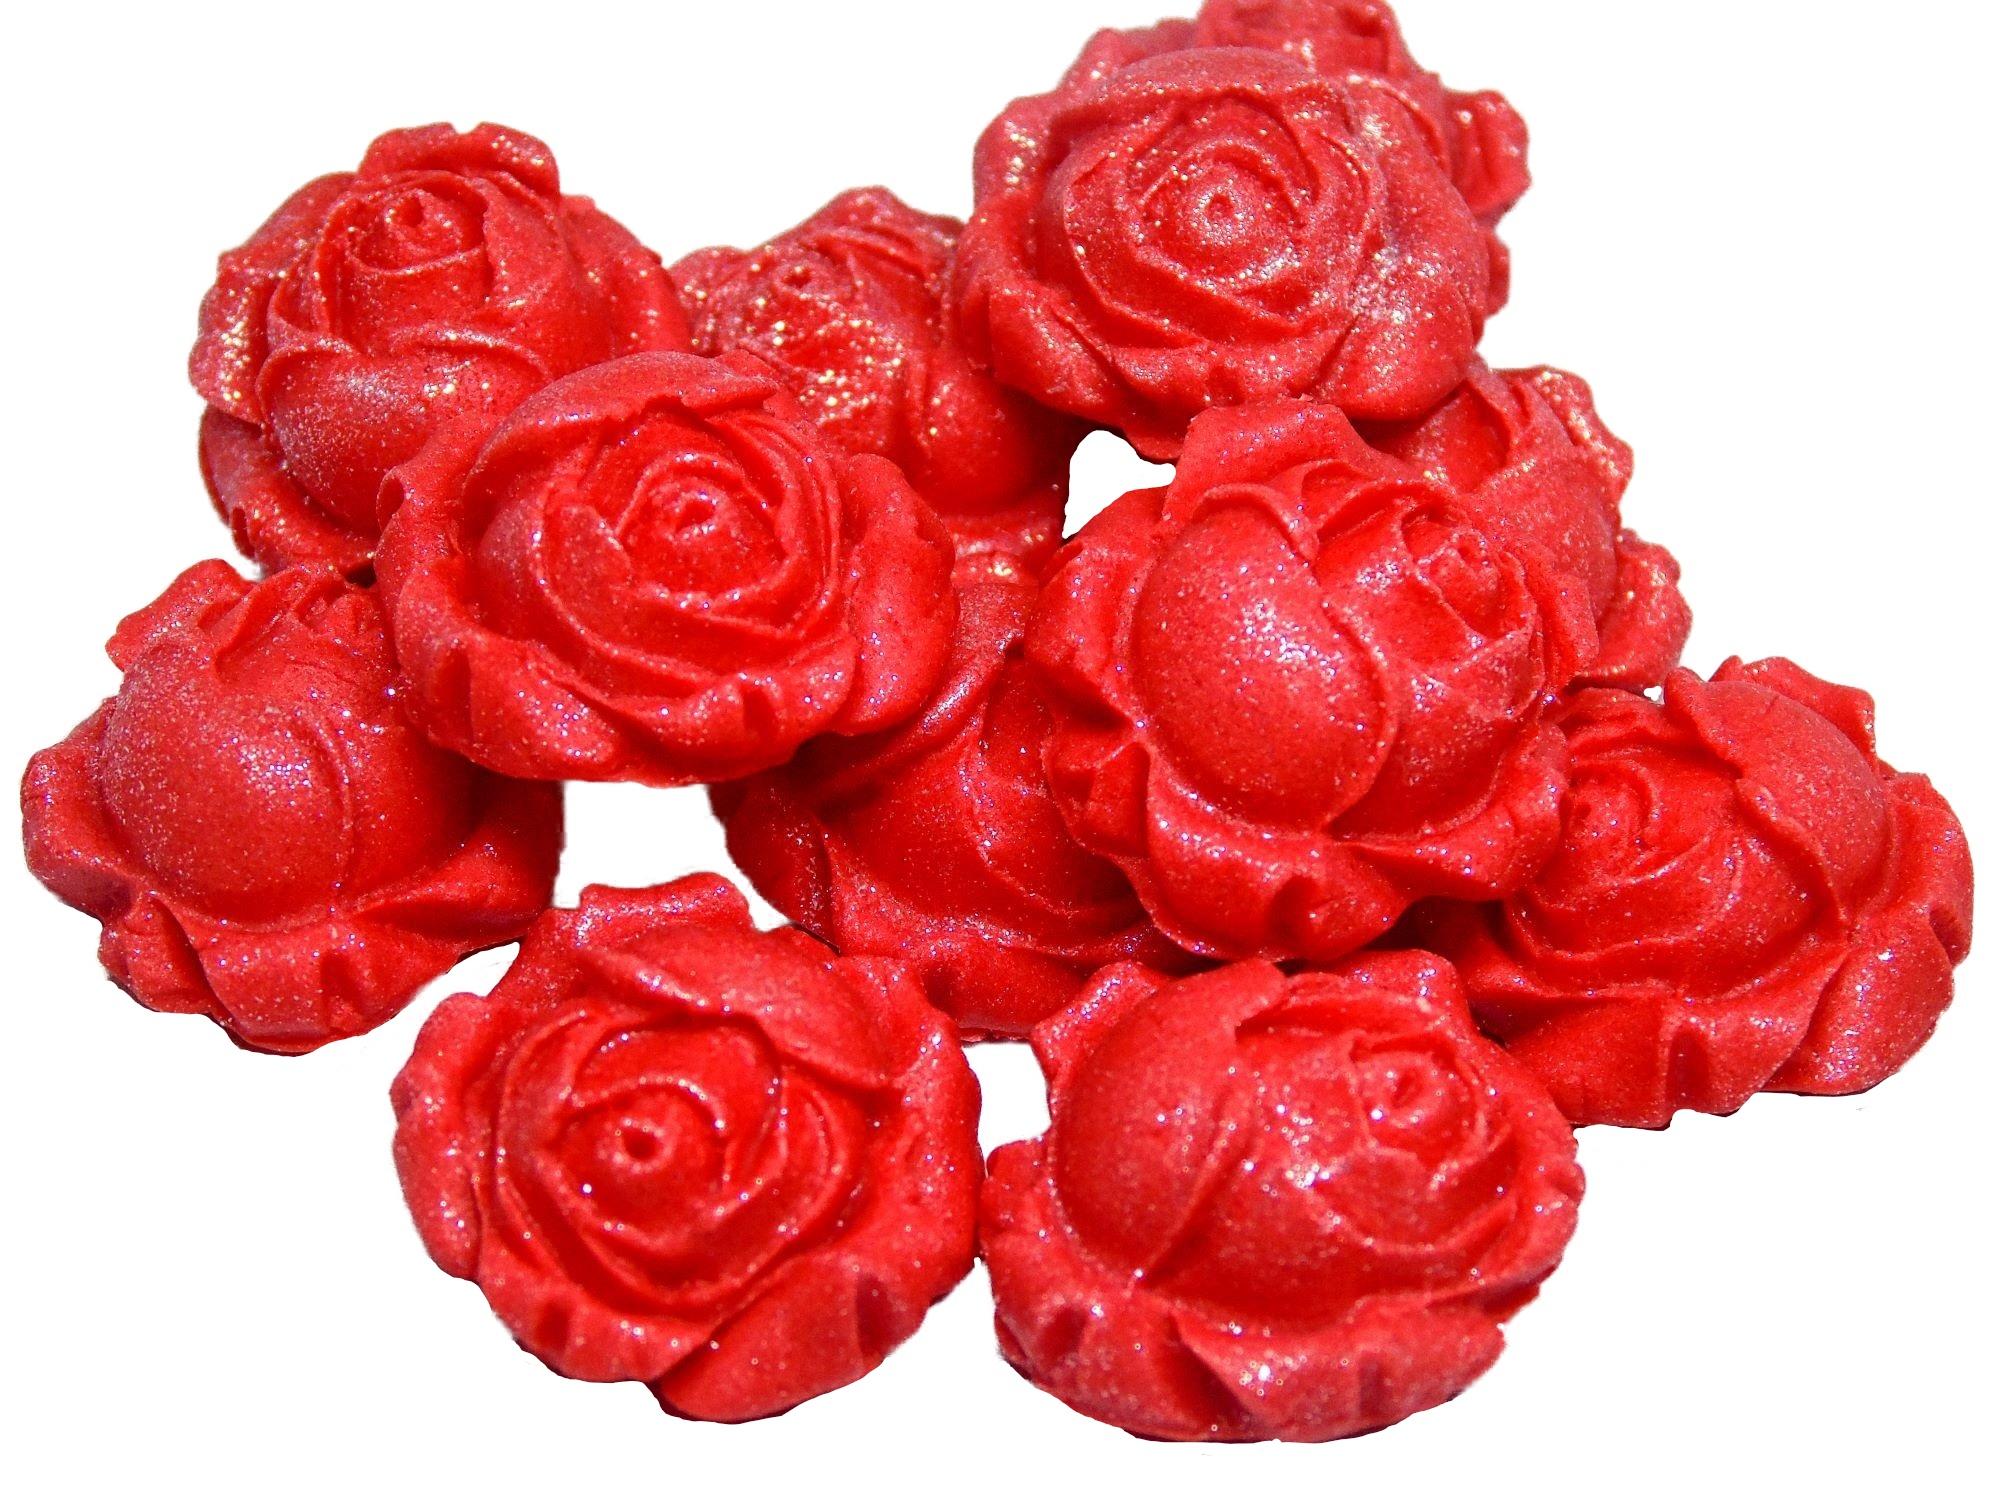 12 Glittered Red Rose Buds Edible Vegan Cupcake Cake Toppers